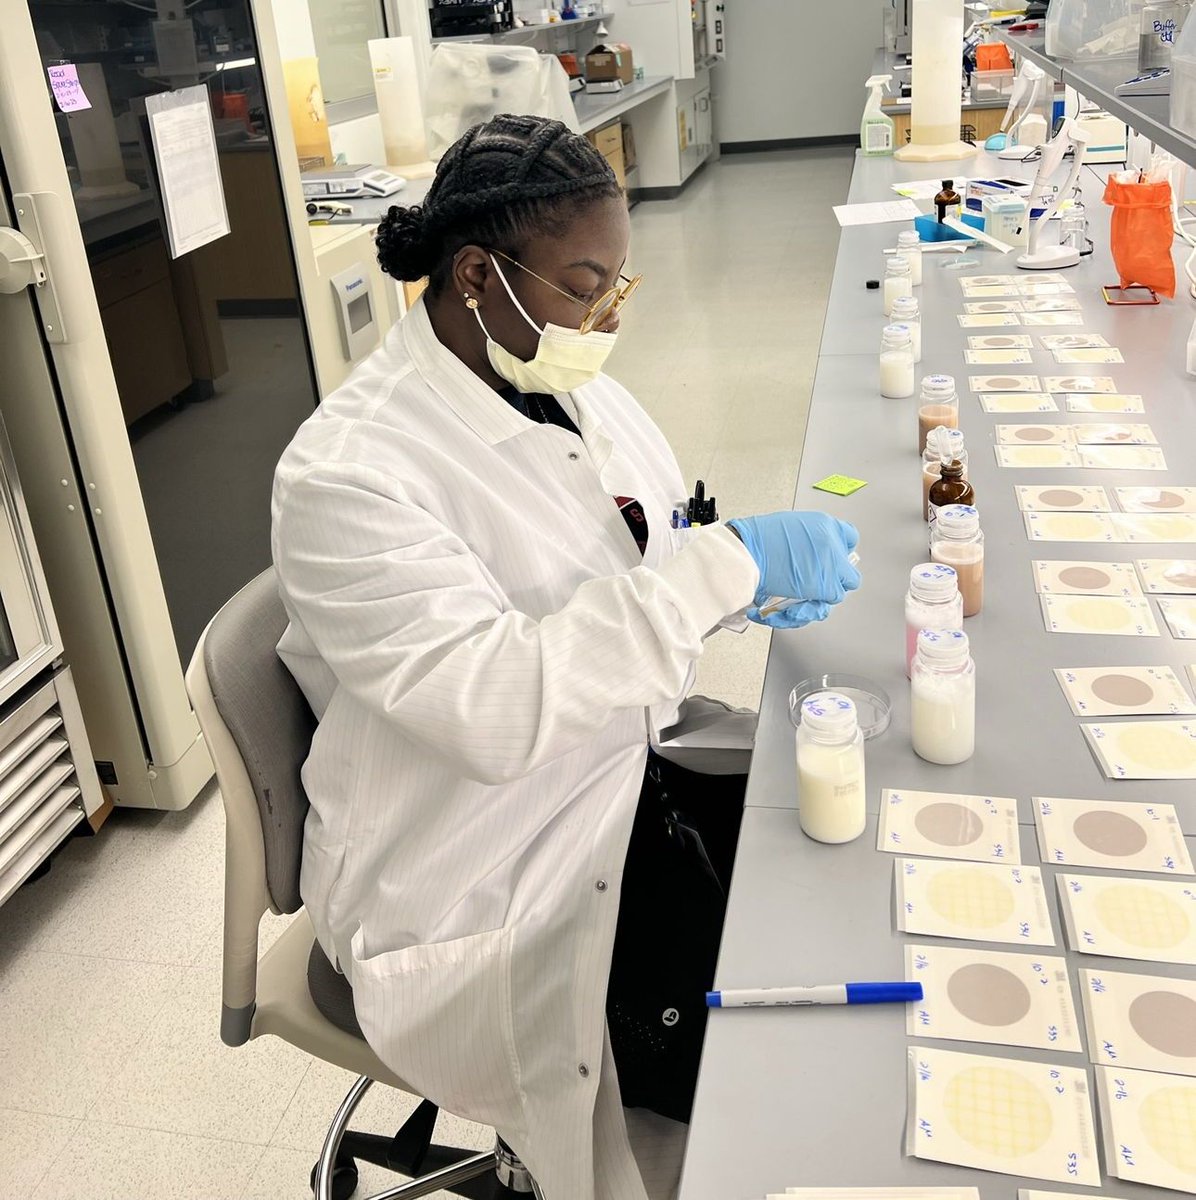 The MDH Laboratories Administration is proud to be a public health partner in the @APHL fellowship program and hosting Makayla Enchill. She is the first inaugural fellow in Food Safety.  #aphlfellowship